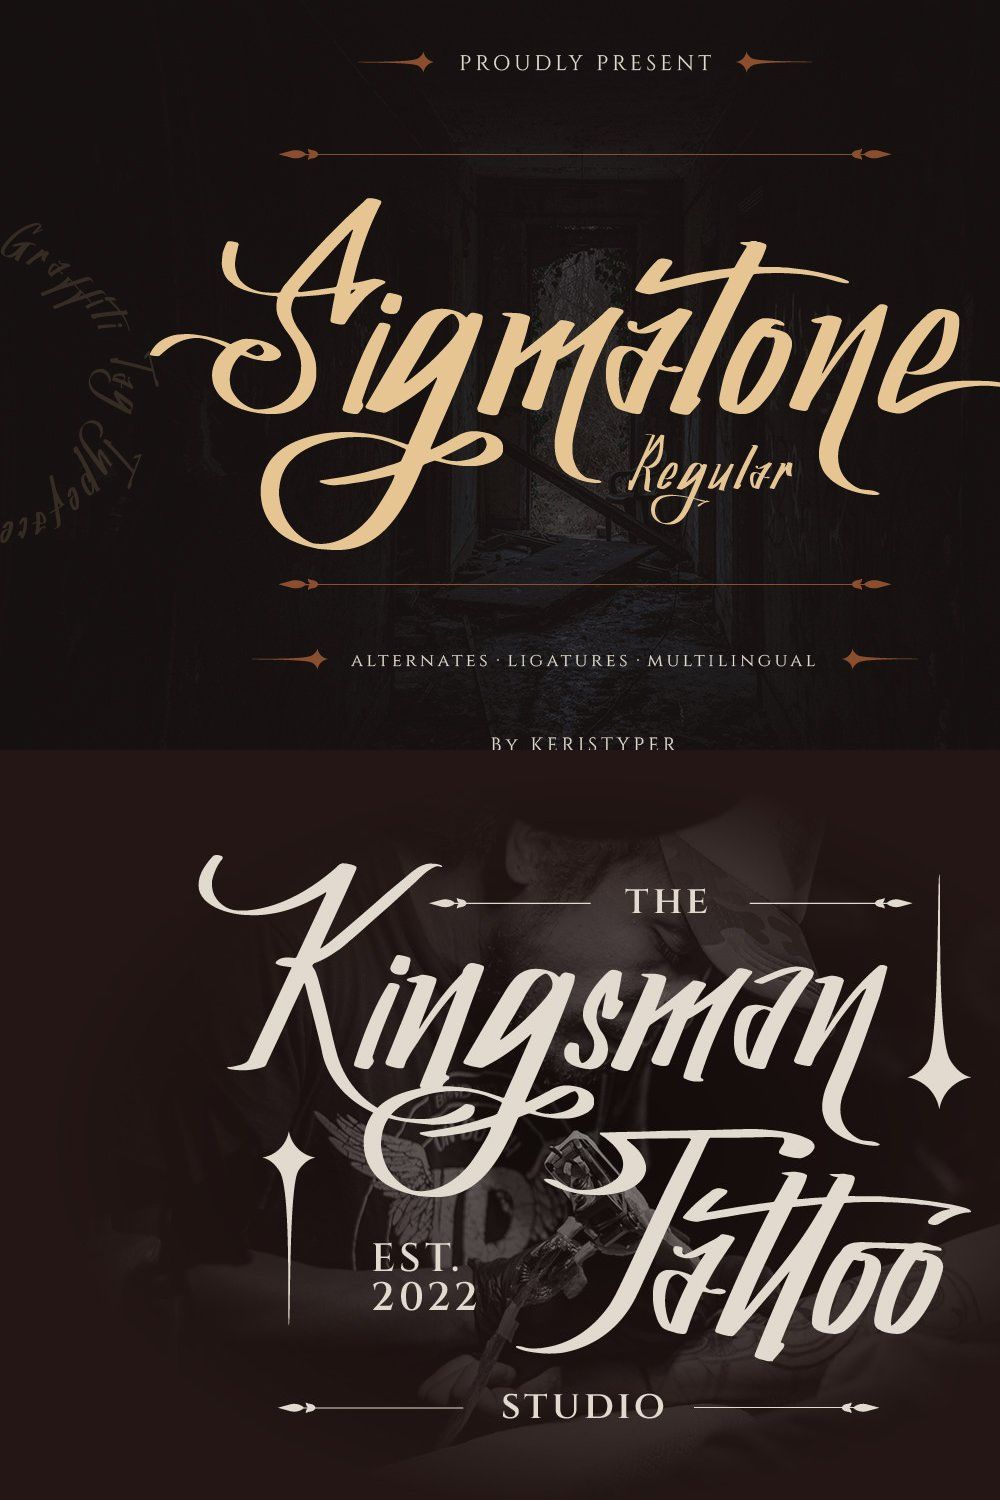 Sigmatone pinterest preview image.